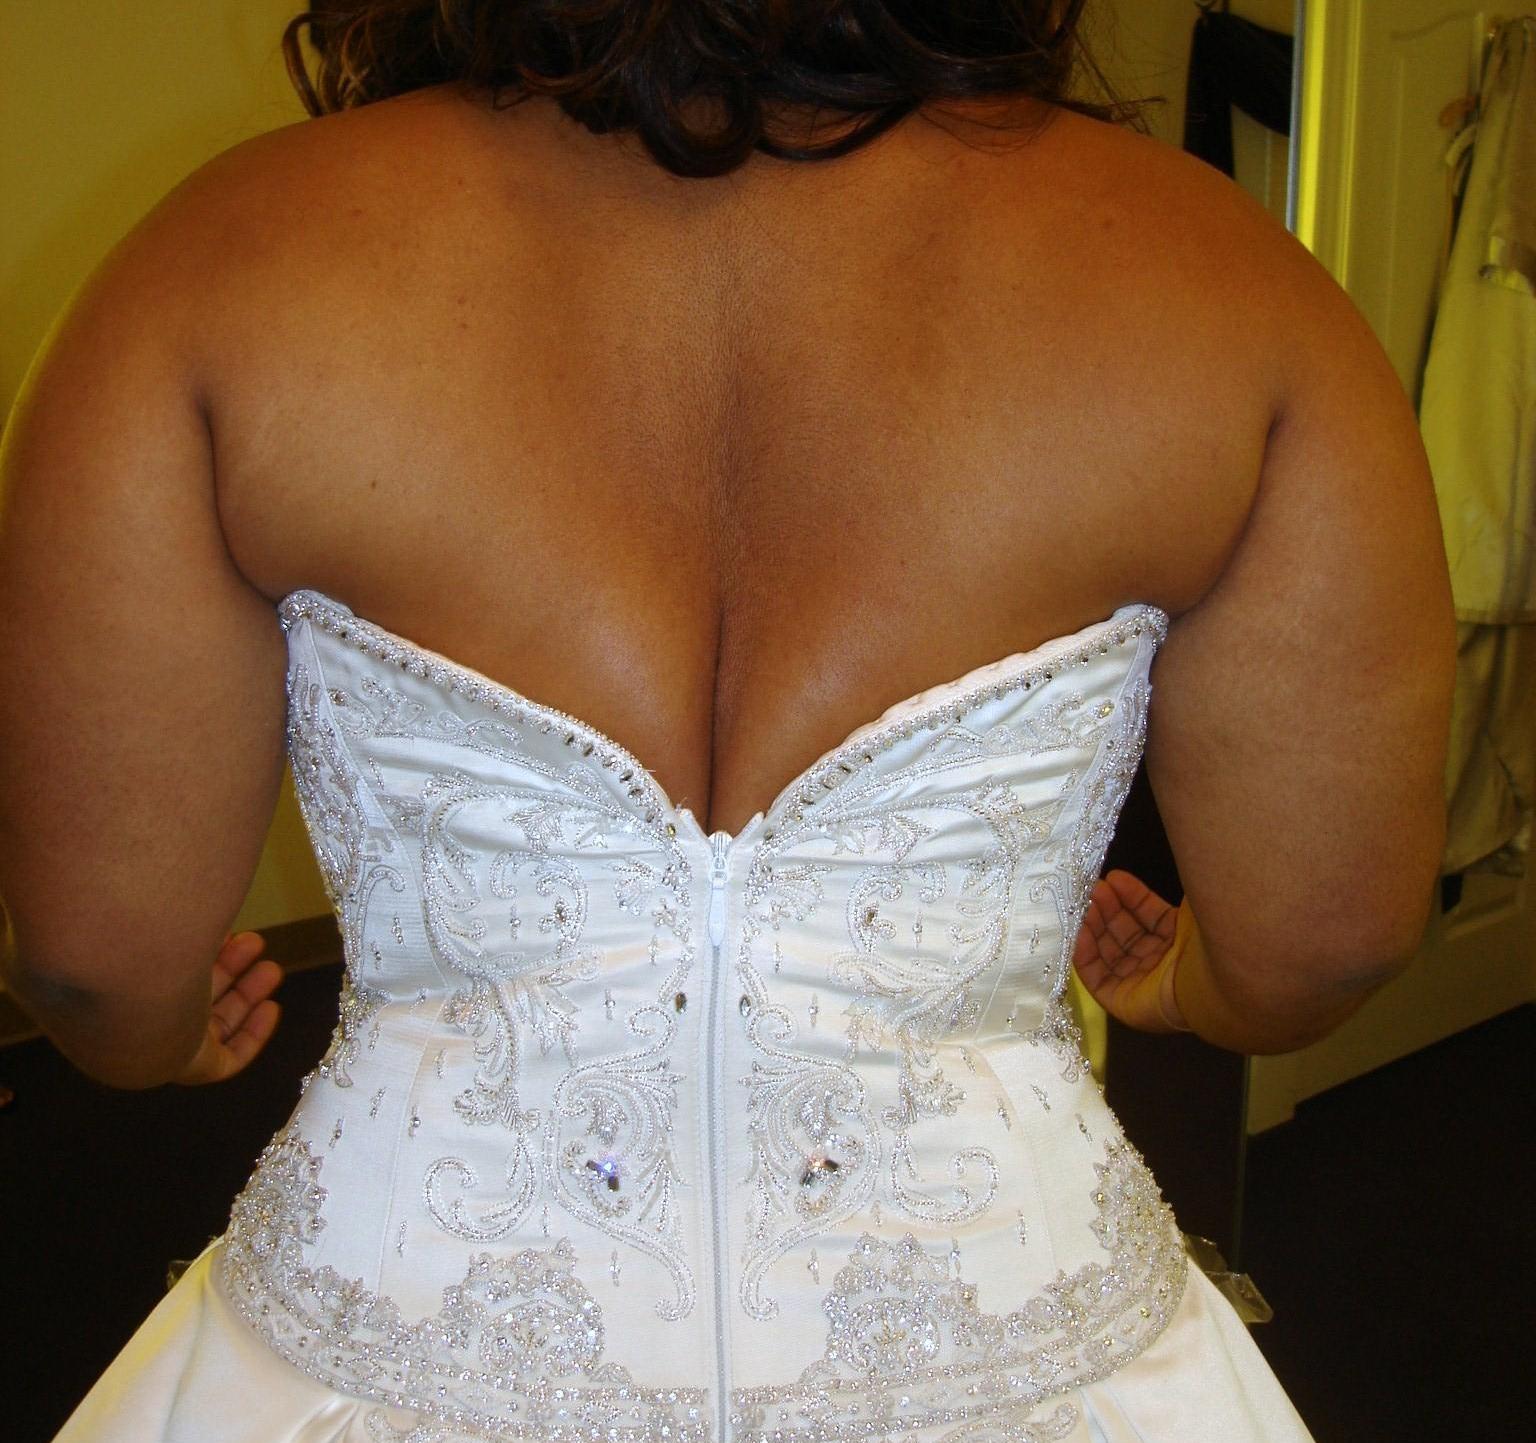 How to decrease look of back/under arm fat in a strapless gown?, Weddings,  Wedding Attire, Wedding Forums